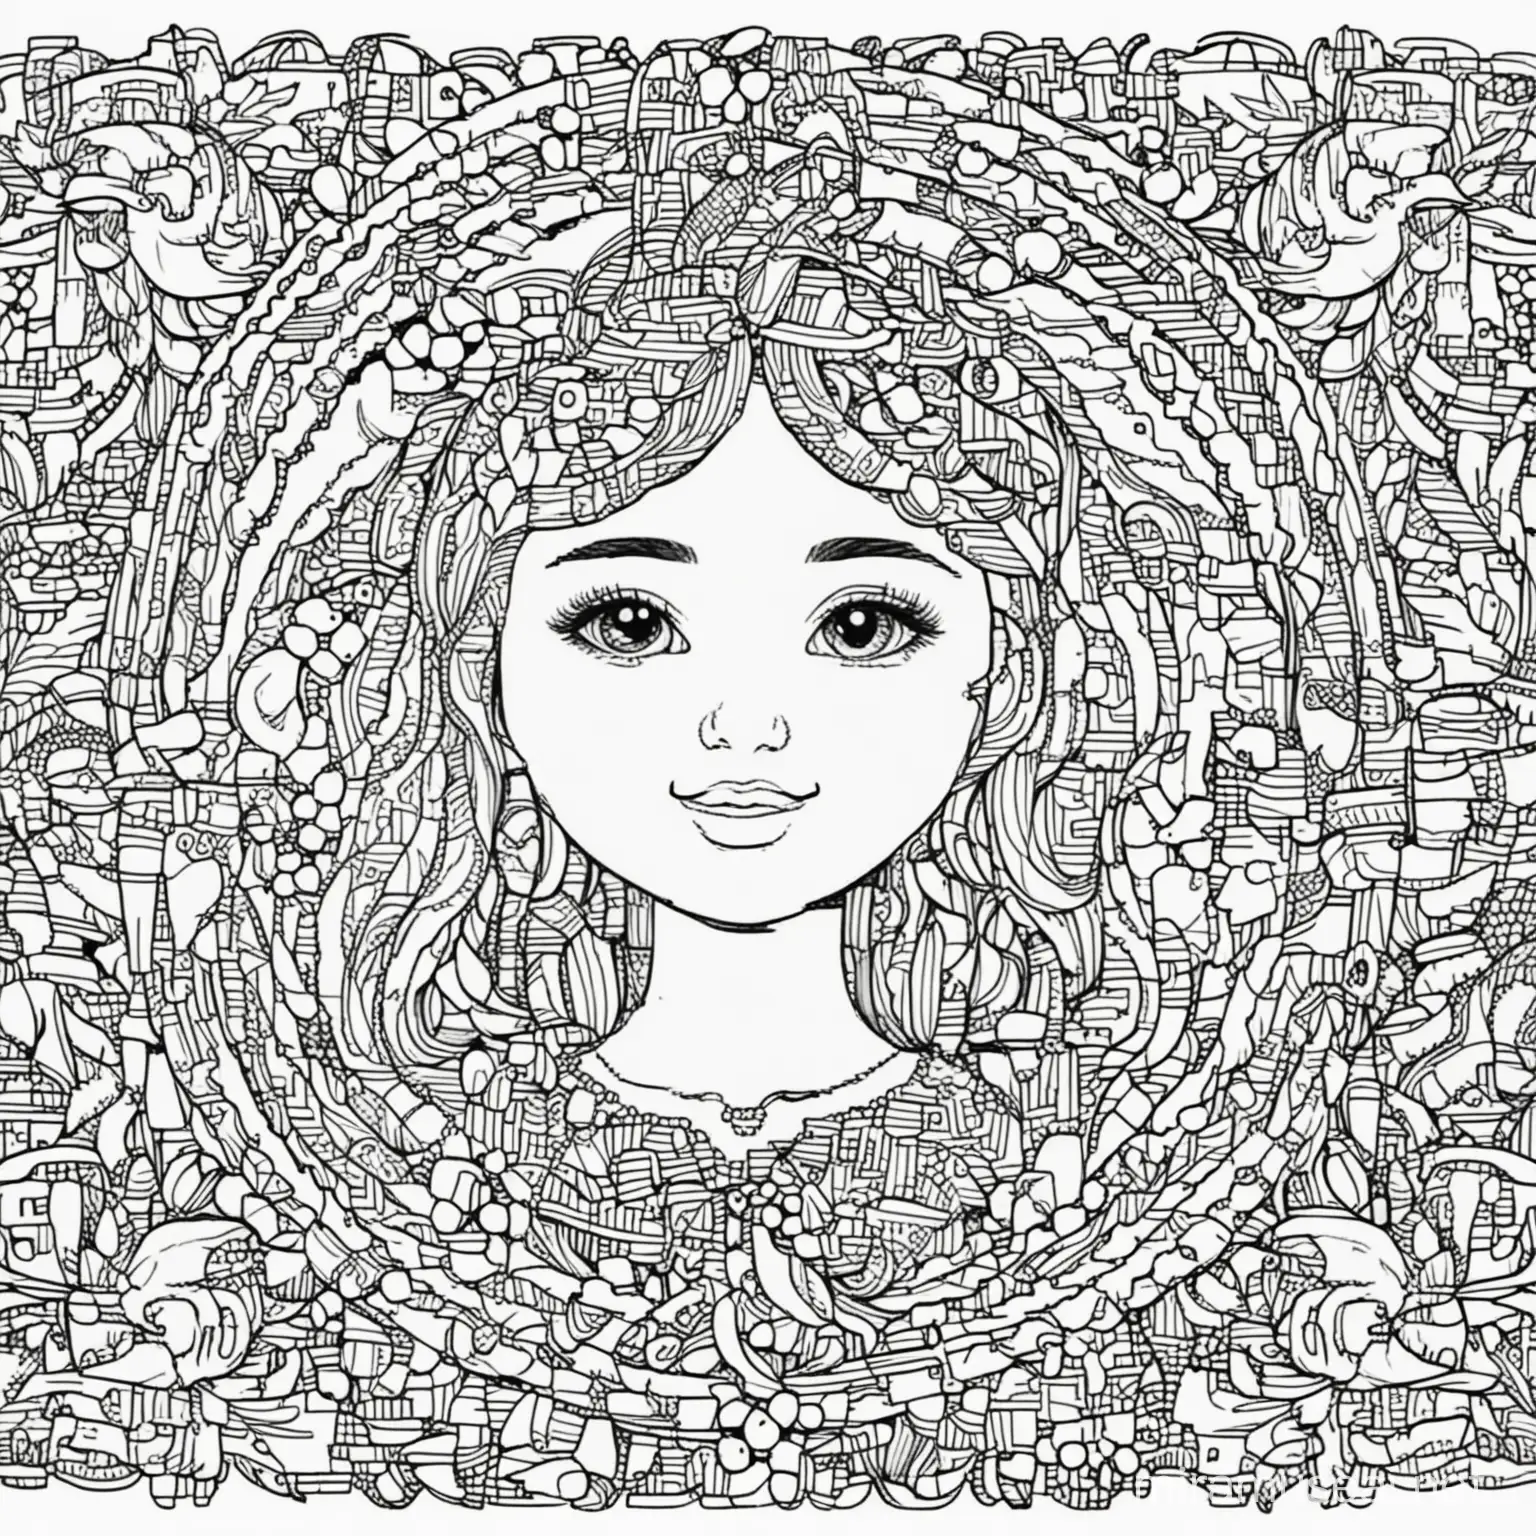 coloring book for kids, simple, adult colouring book, no detail, outline no colour, cartoon, ukraine, fill frame, edge to edge, clipart white background --ar 3:2 --style raw